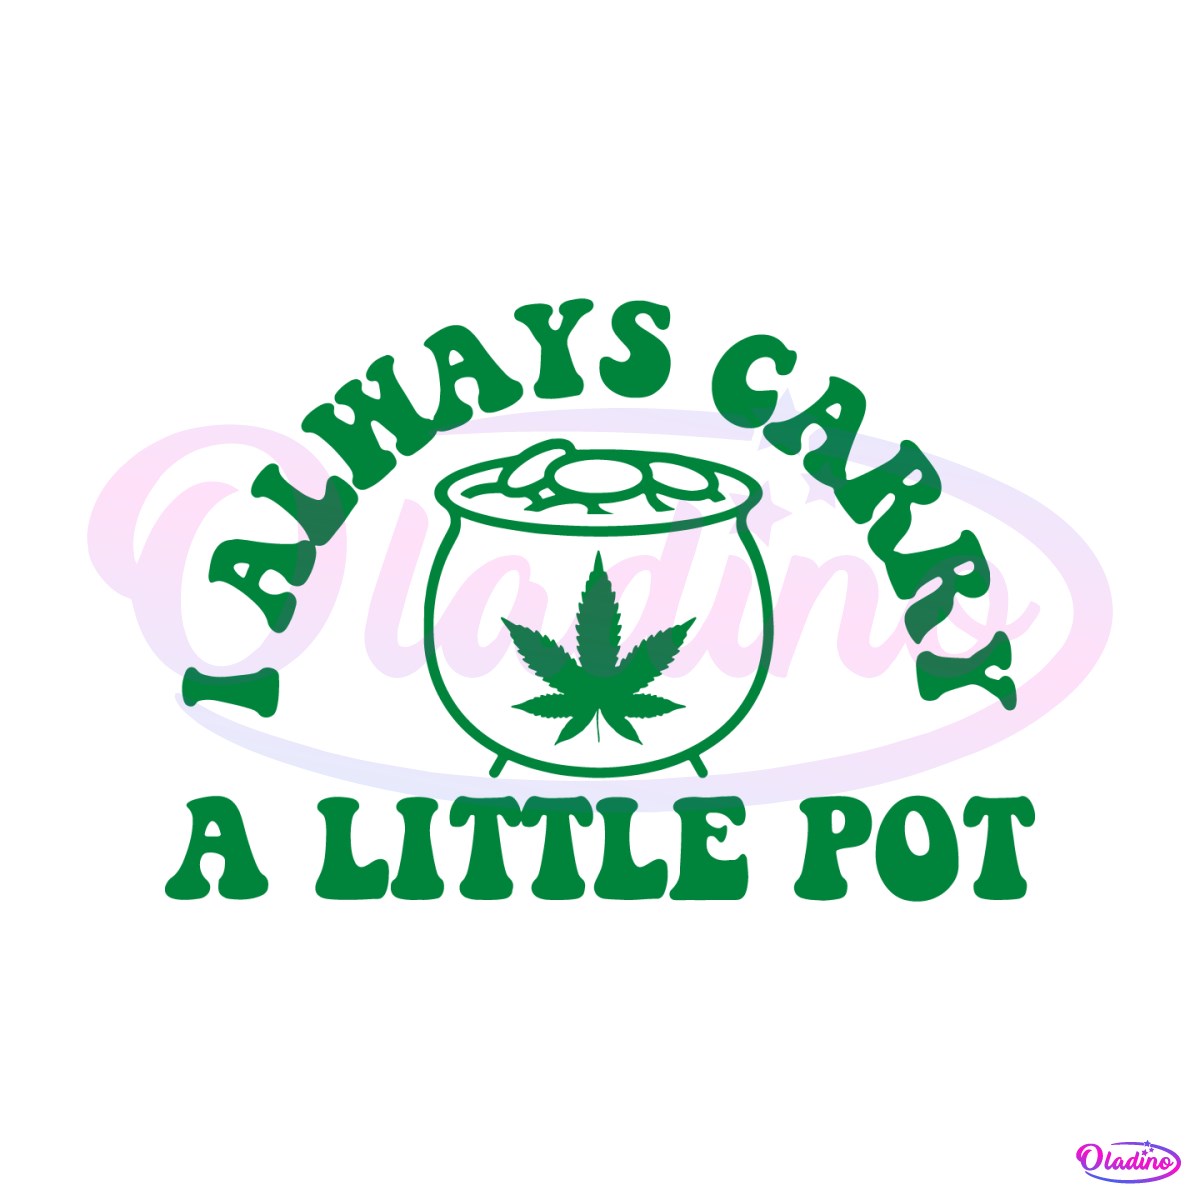 funny-weed-i-always-carry-a-little-pot-svg